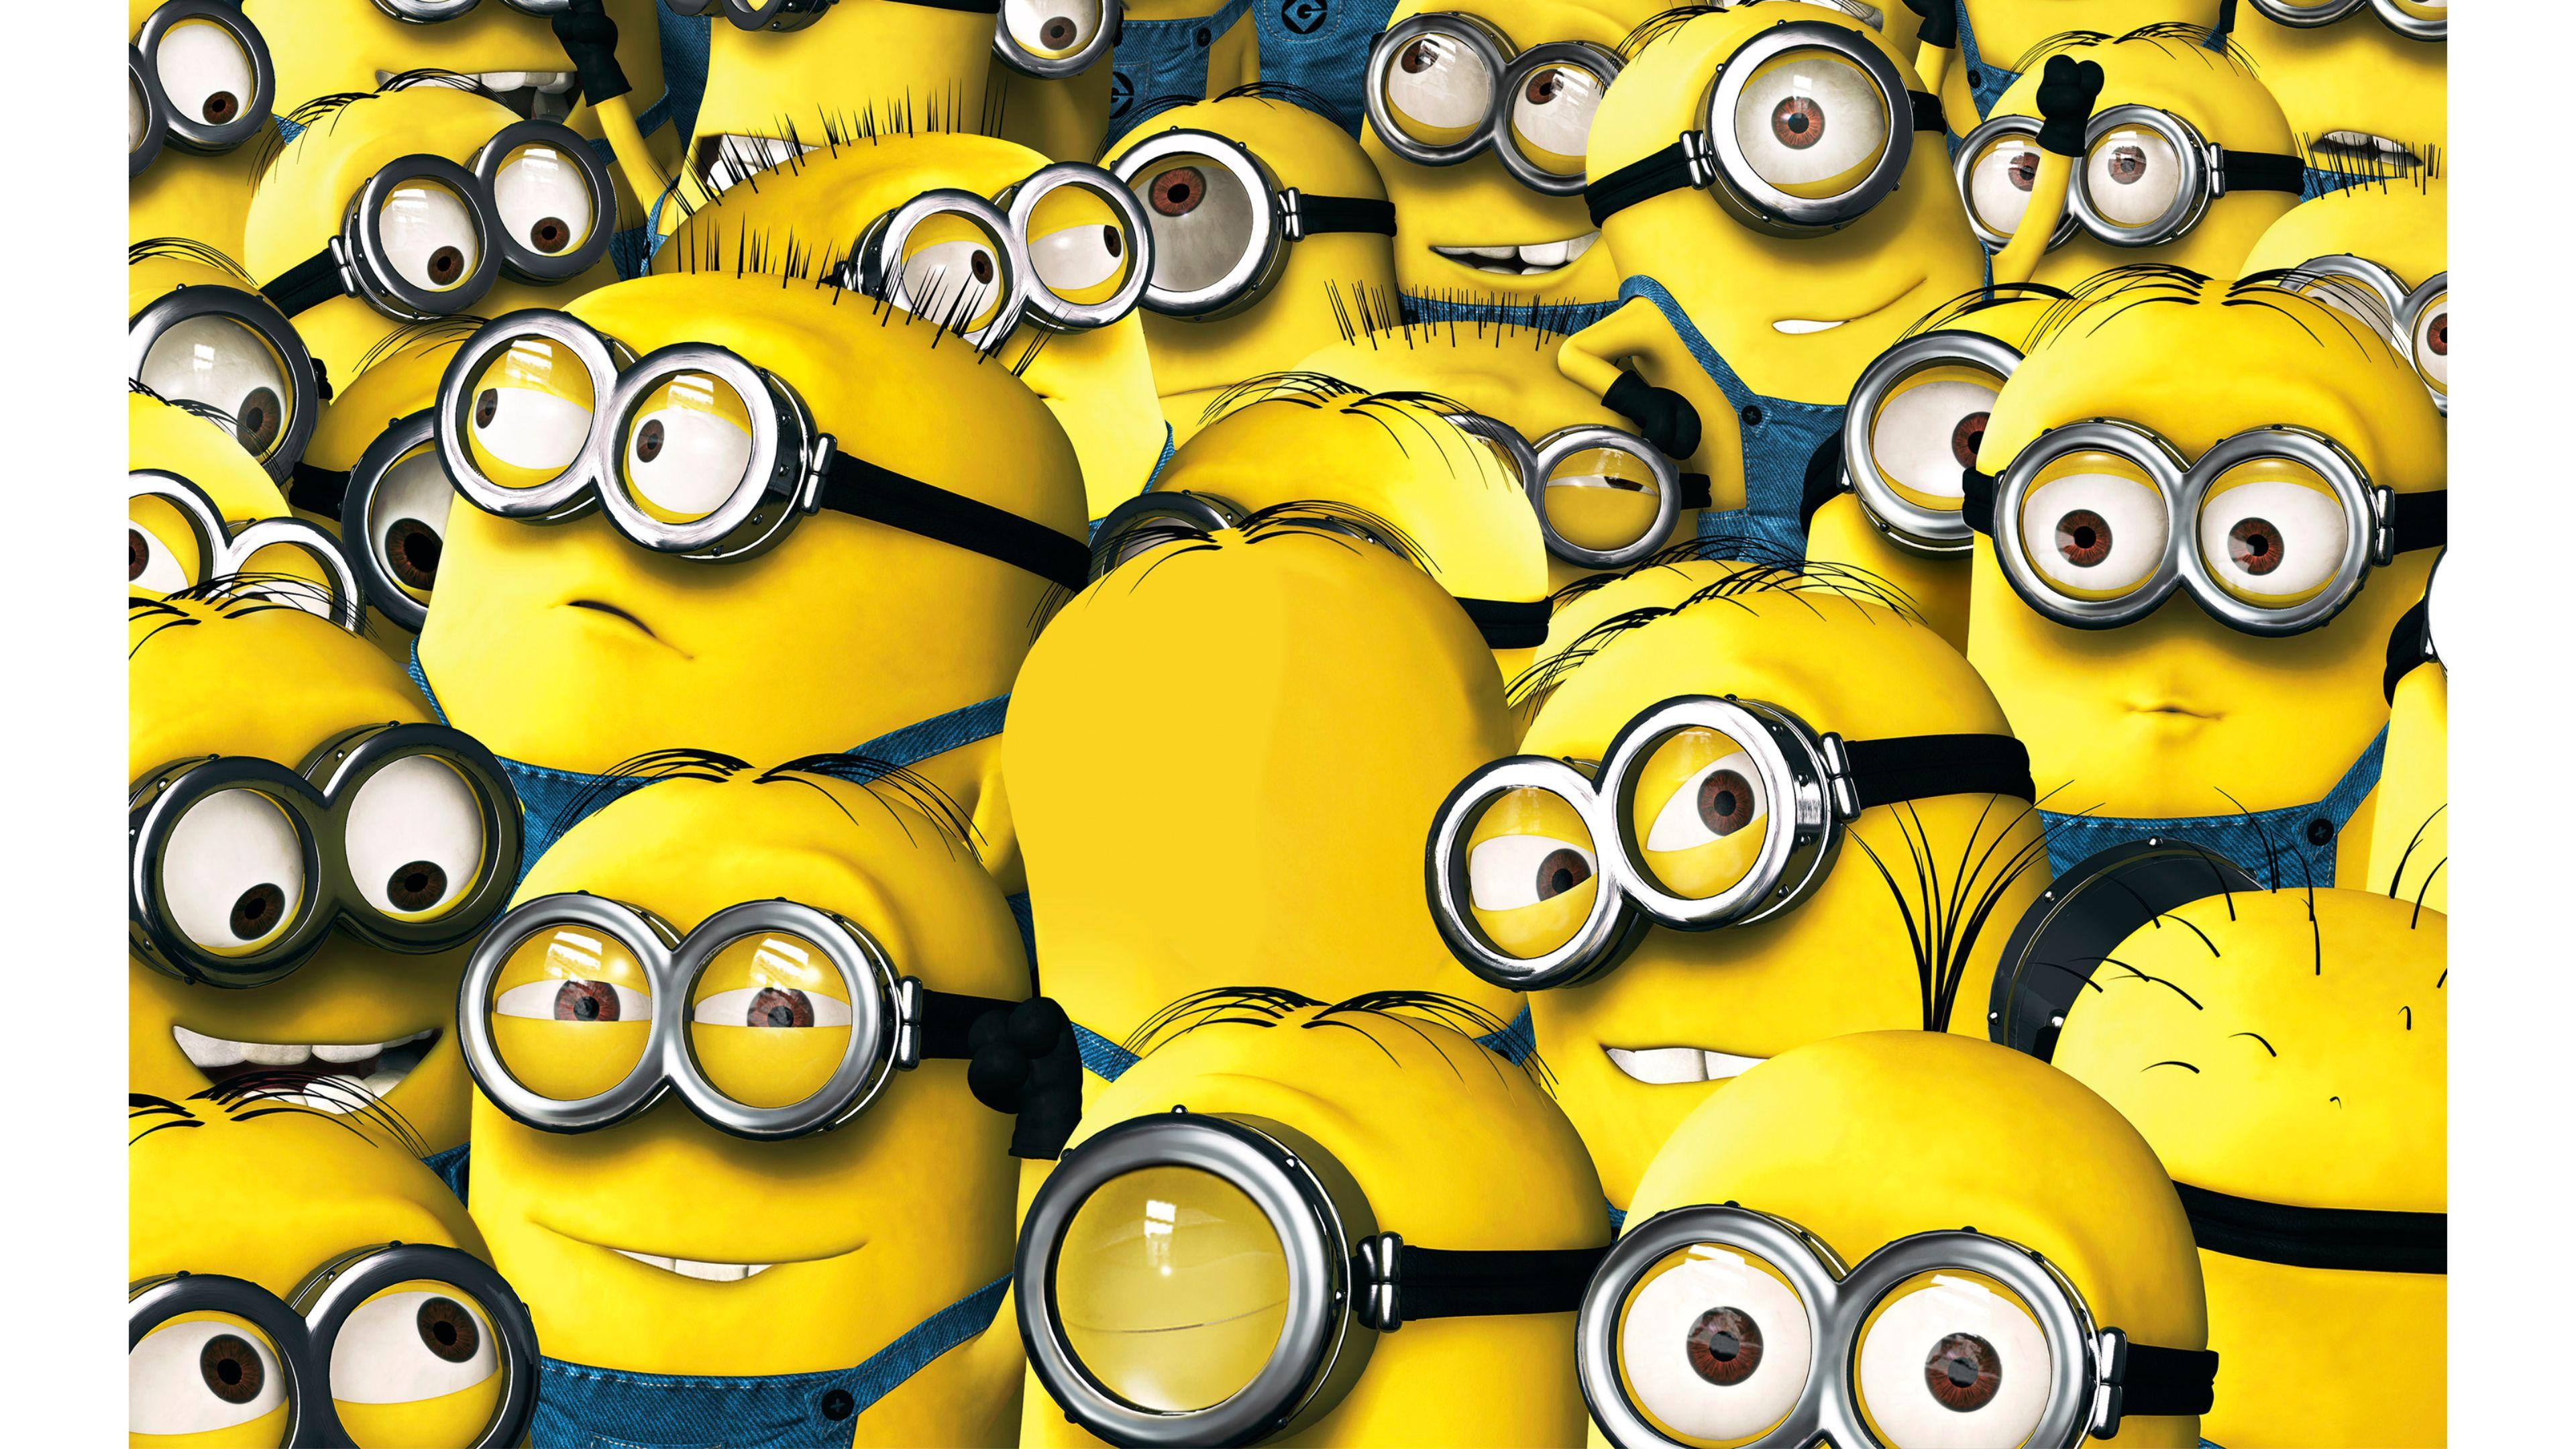 minions 4K wallpaper for your desktop or mobile screen free